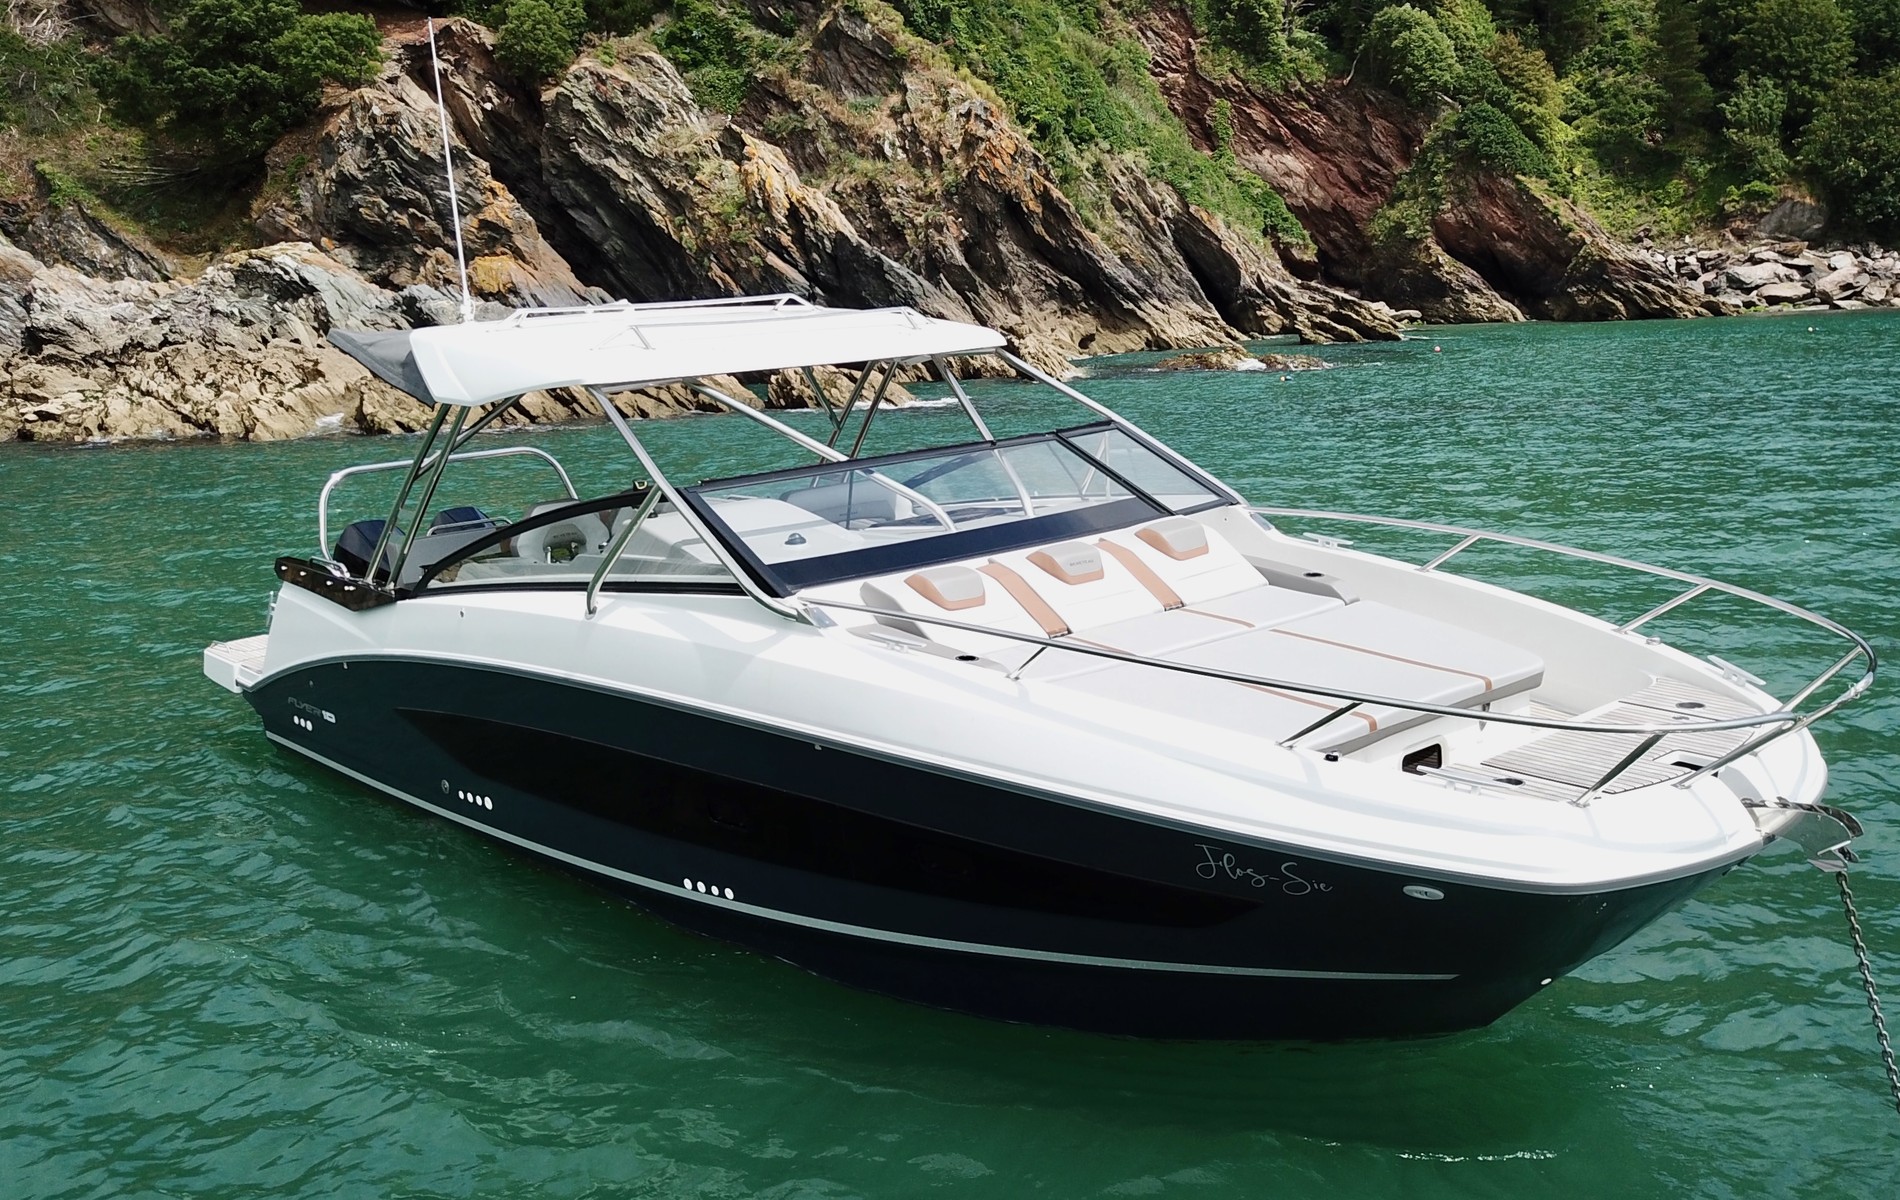 The USED - 2022 FLYER 10 by Beneteau Outboard